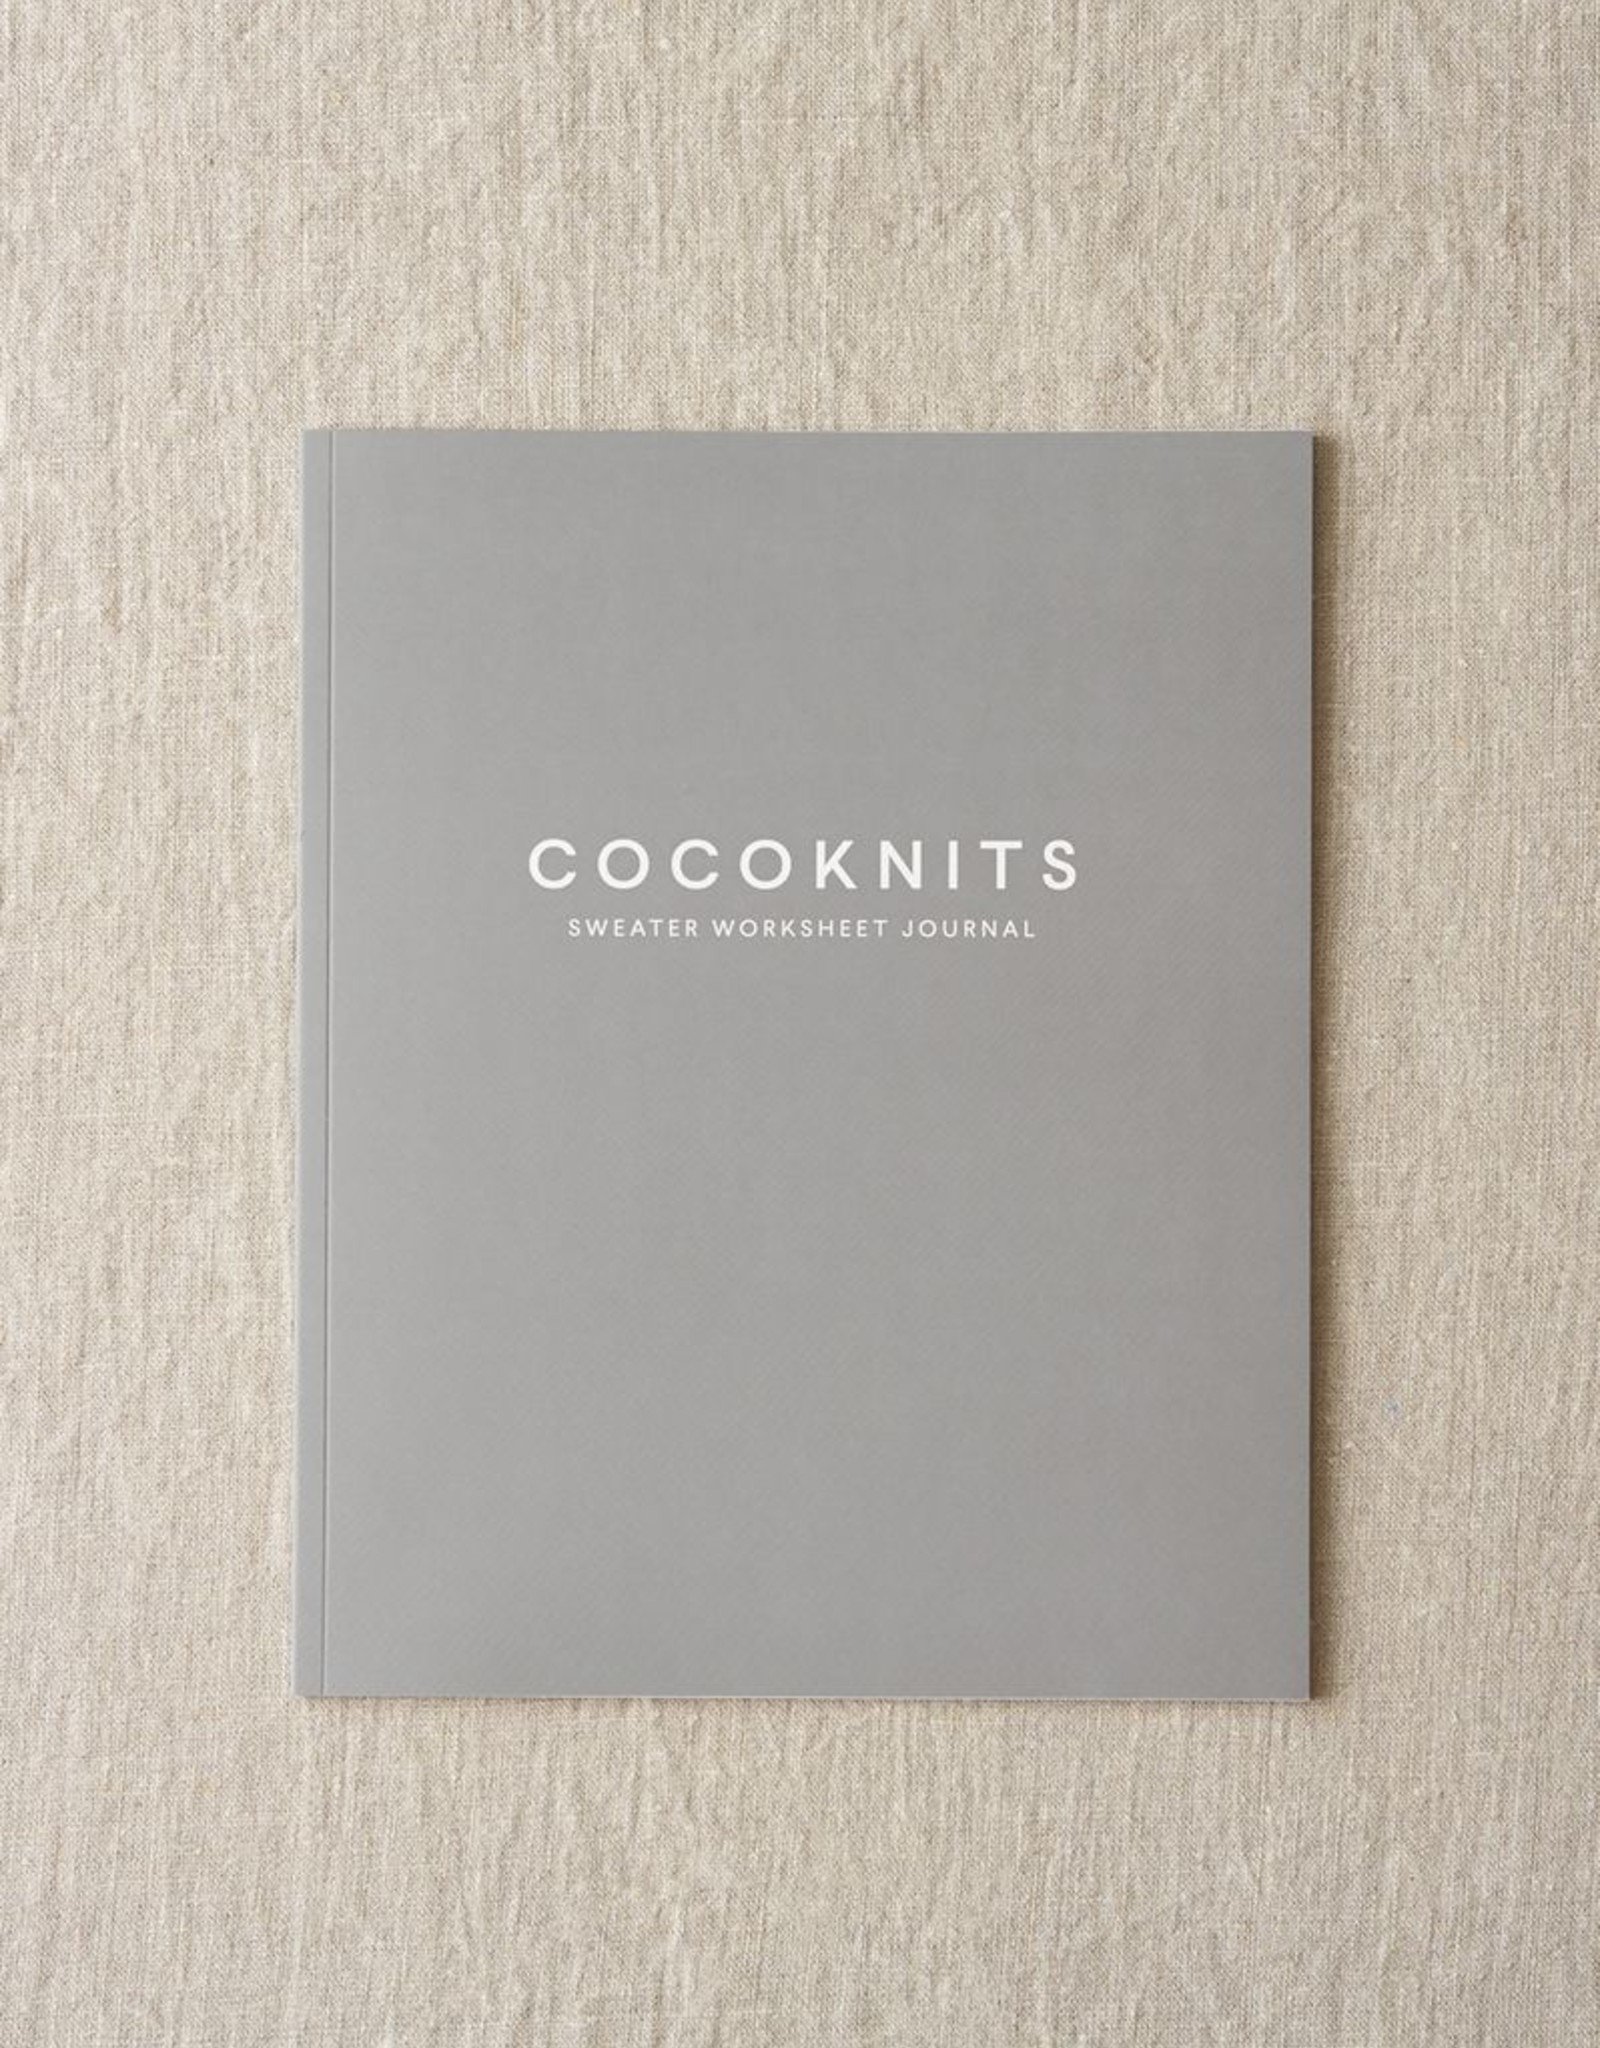 Cocoknits Sweater Worksheet Journal by CocoKnits